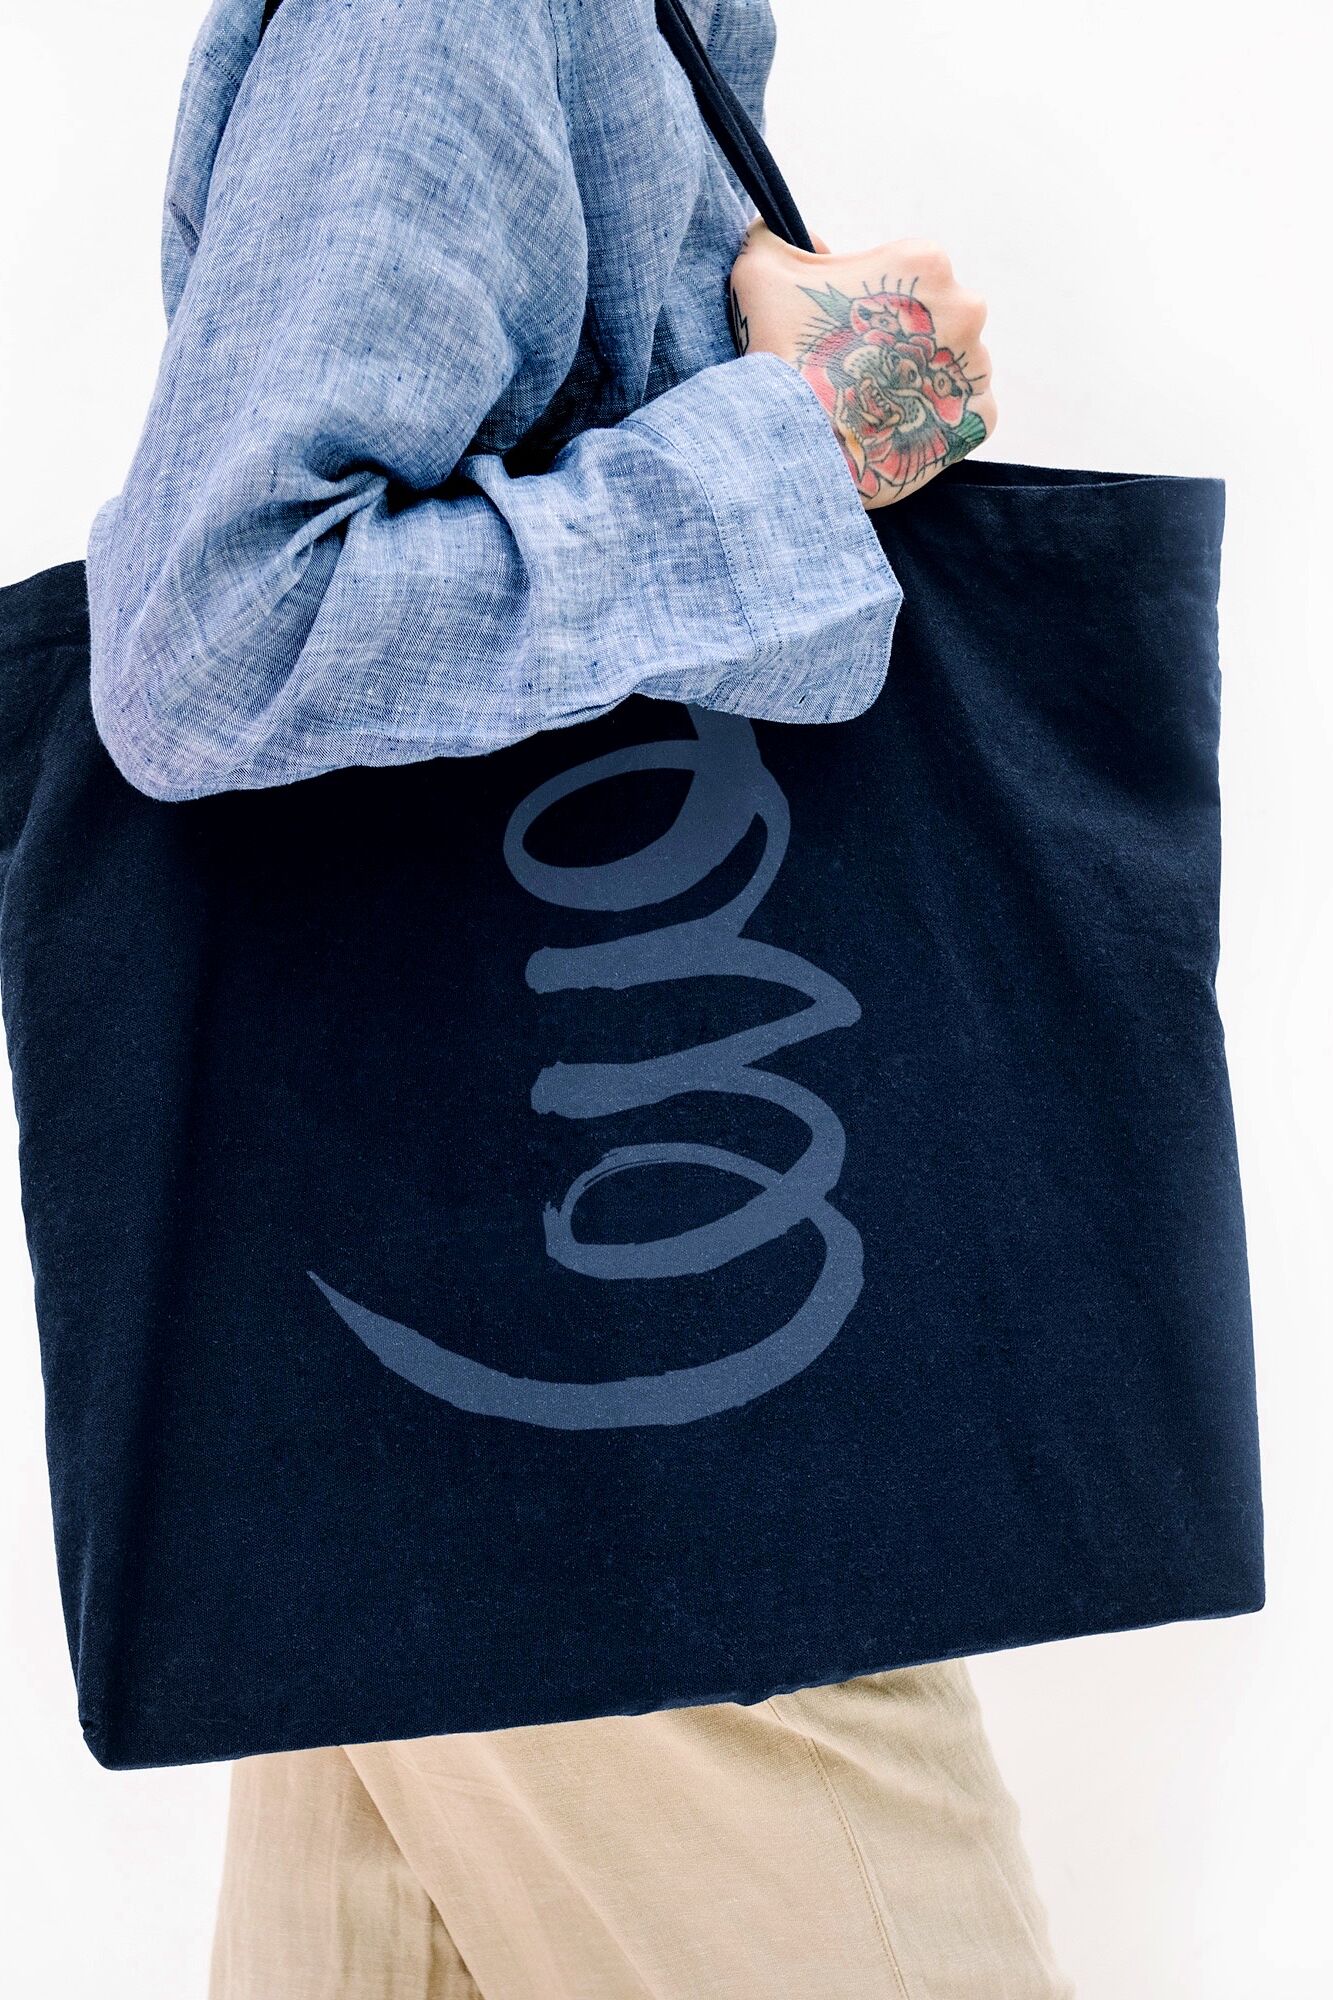 Tattooed Woman In A Blue Linen Shirt Holding A Black Tote Bag Mockup